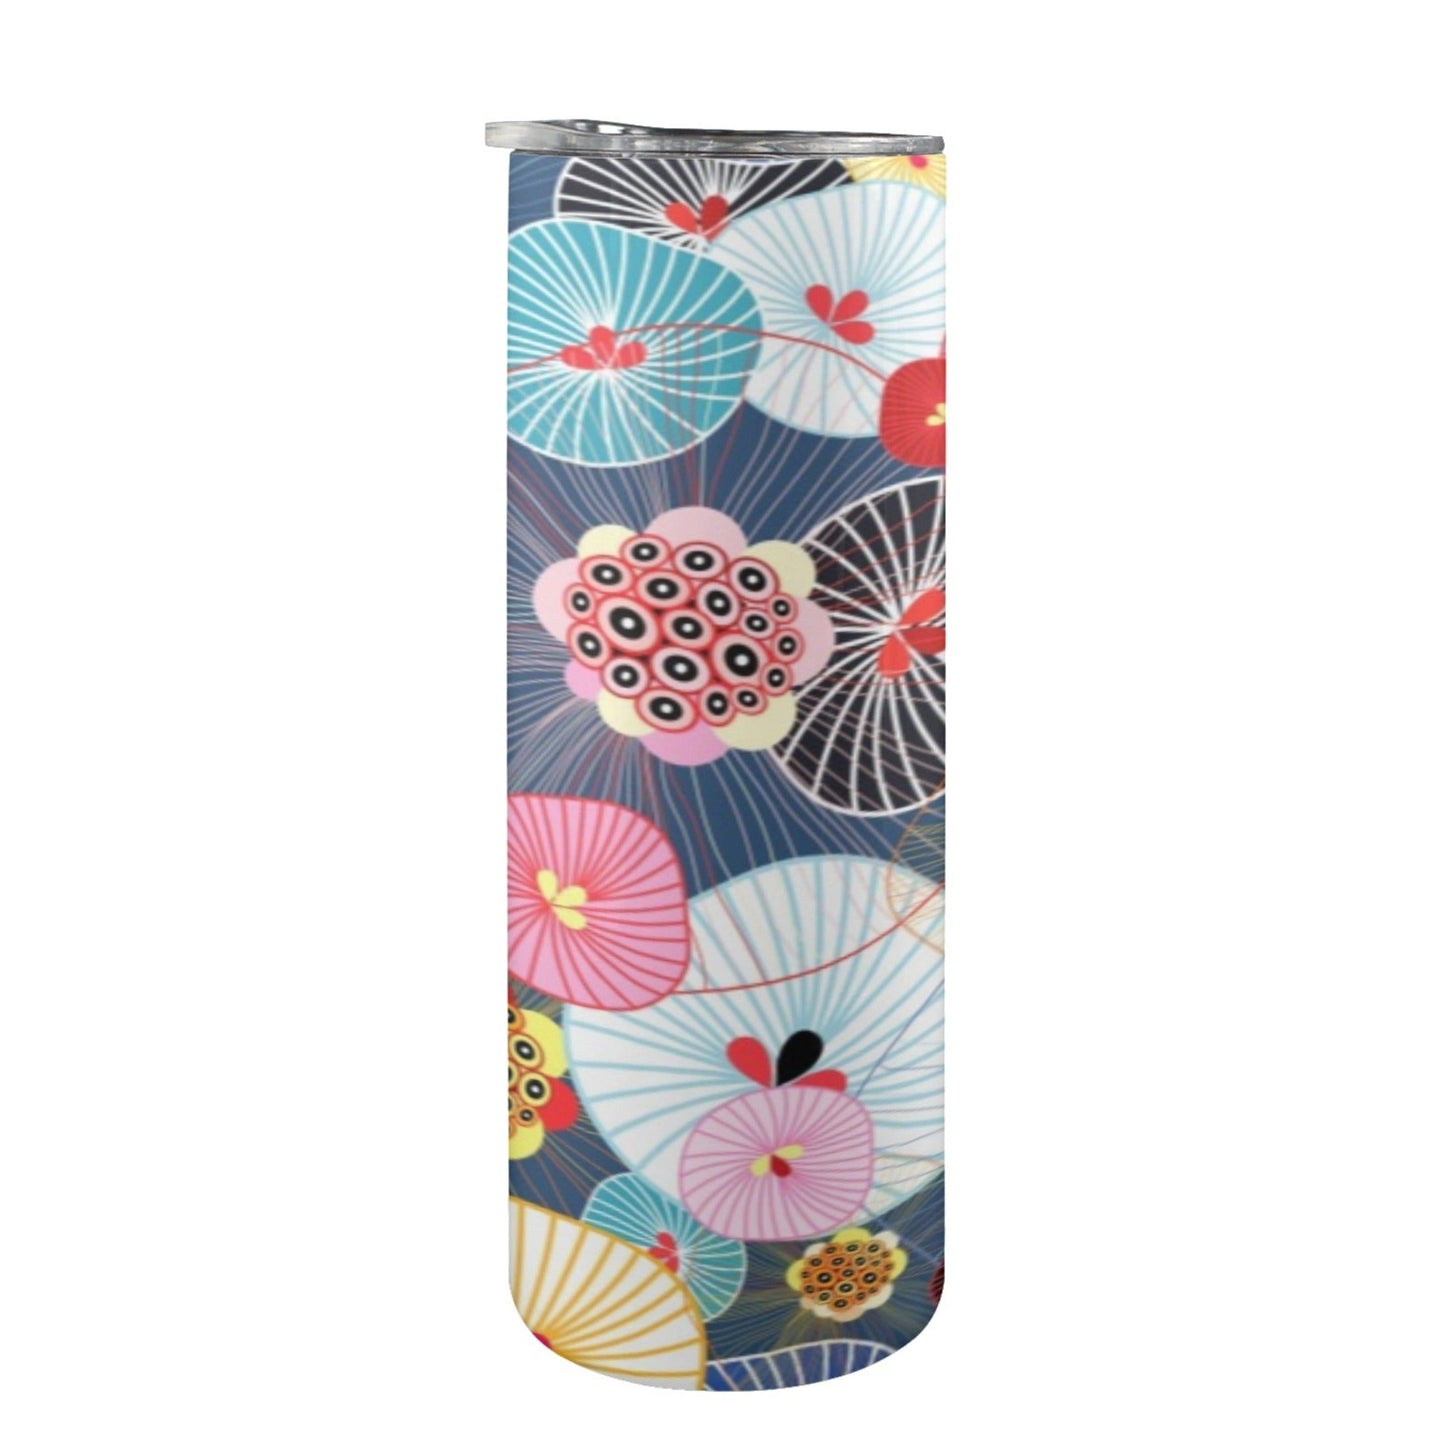 Abstract Floral - 20oz Tall Skinny Tumbler with Lid and Straw 20oz Tall Skinny Tumbler with Lid and Straw